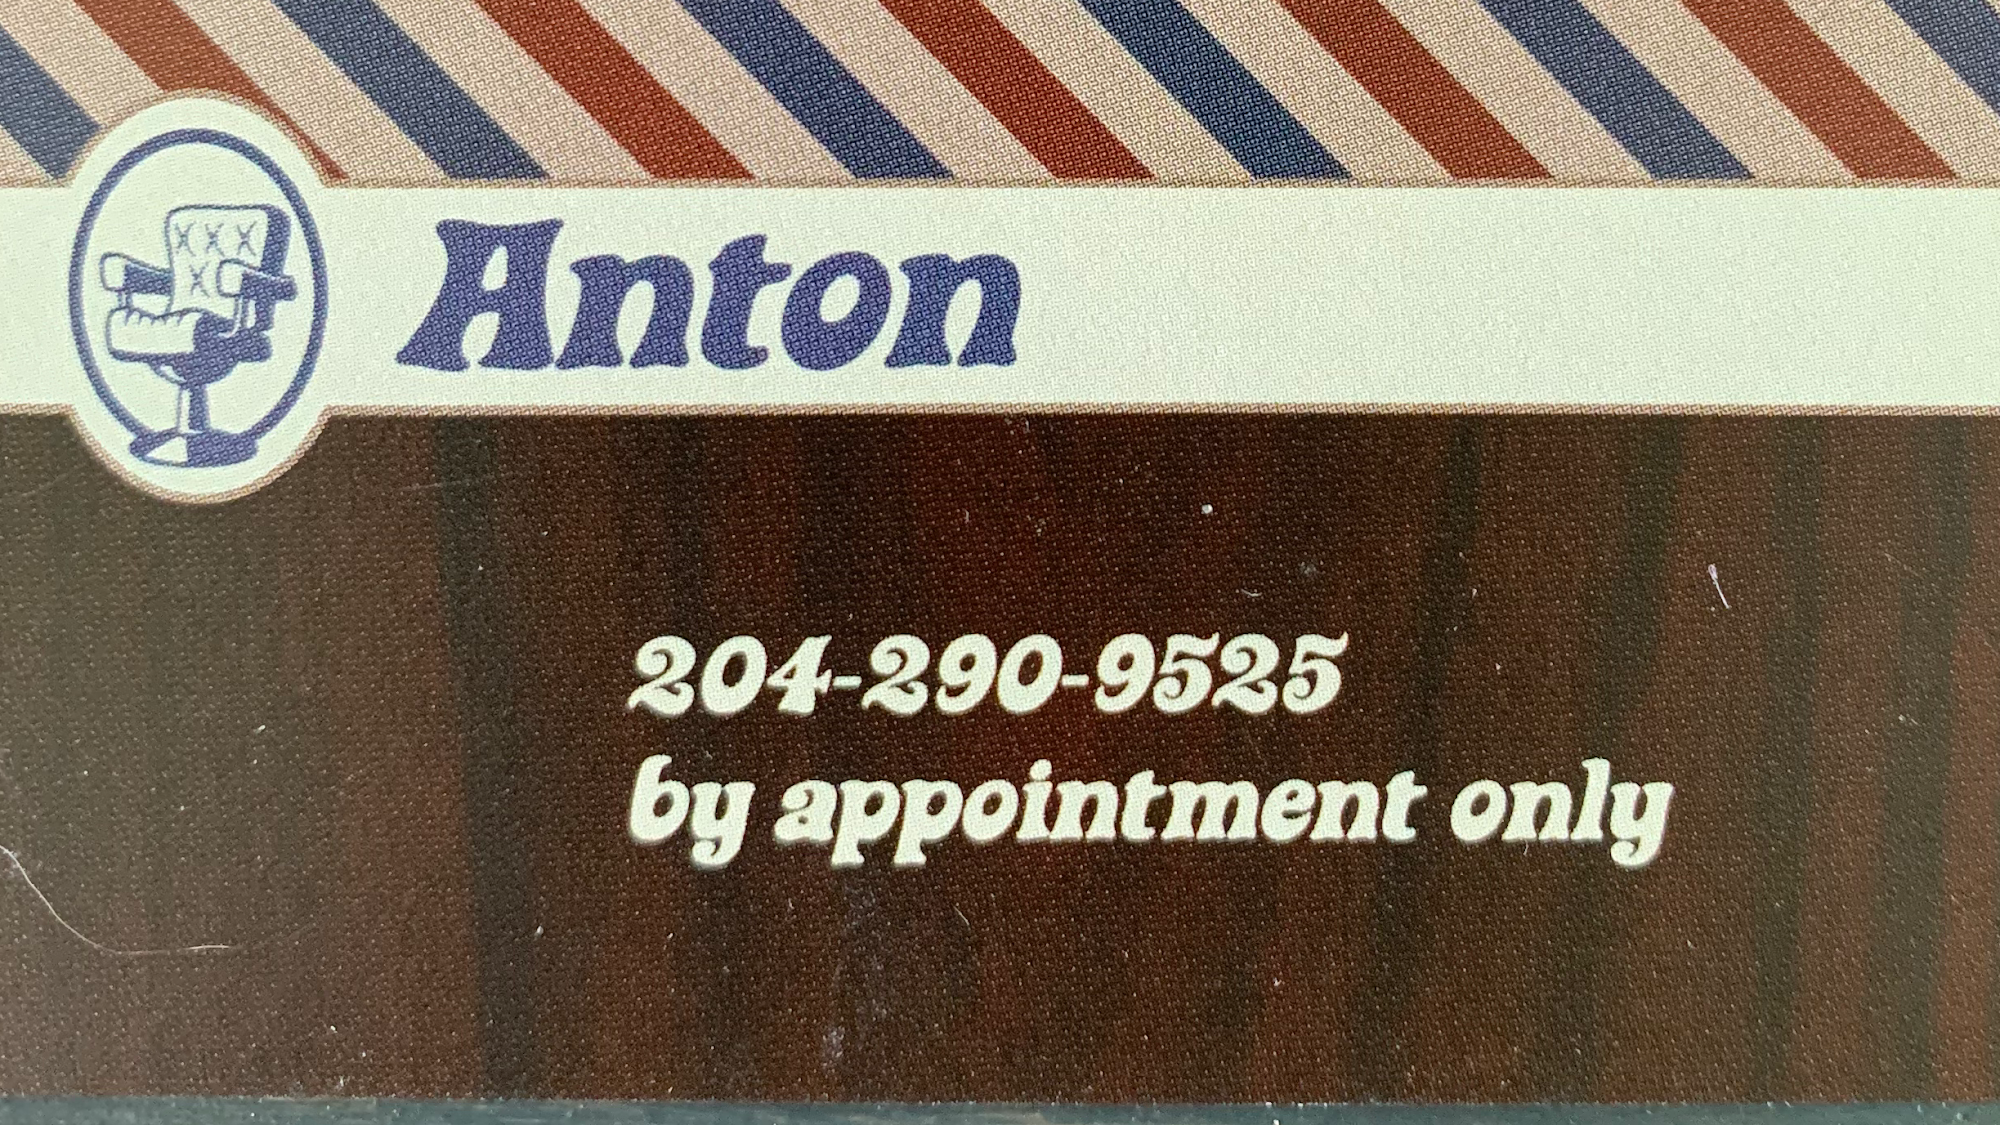 Anton - BrbrSmith (by appointment only)